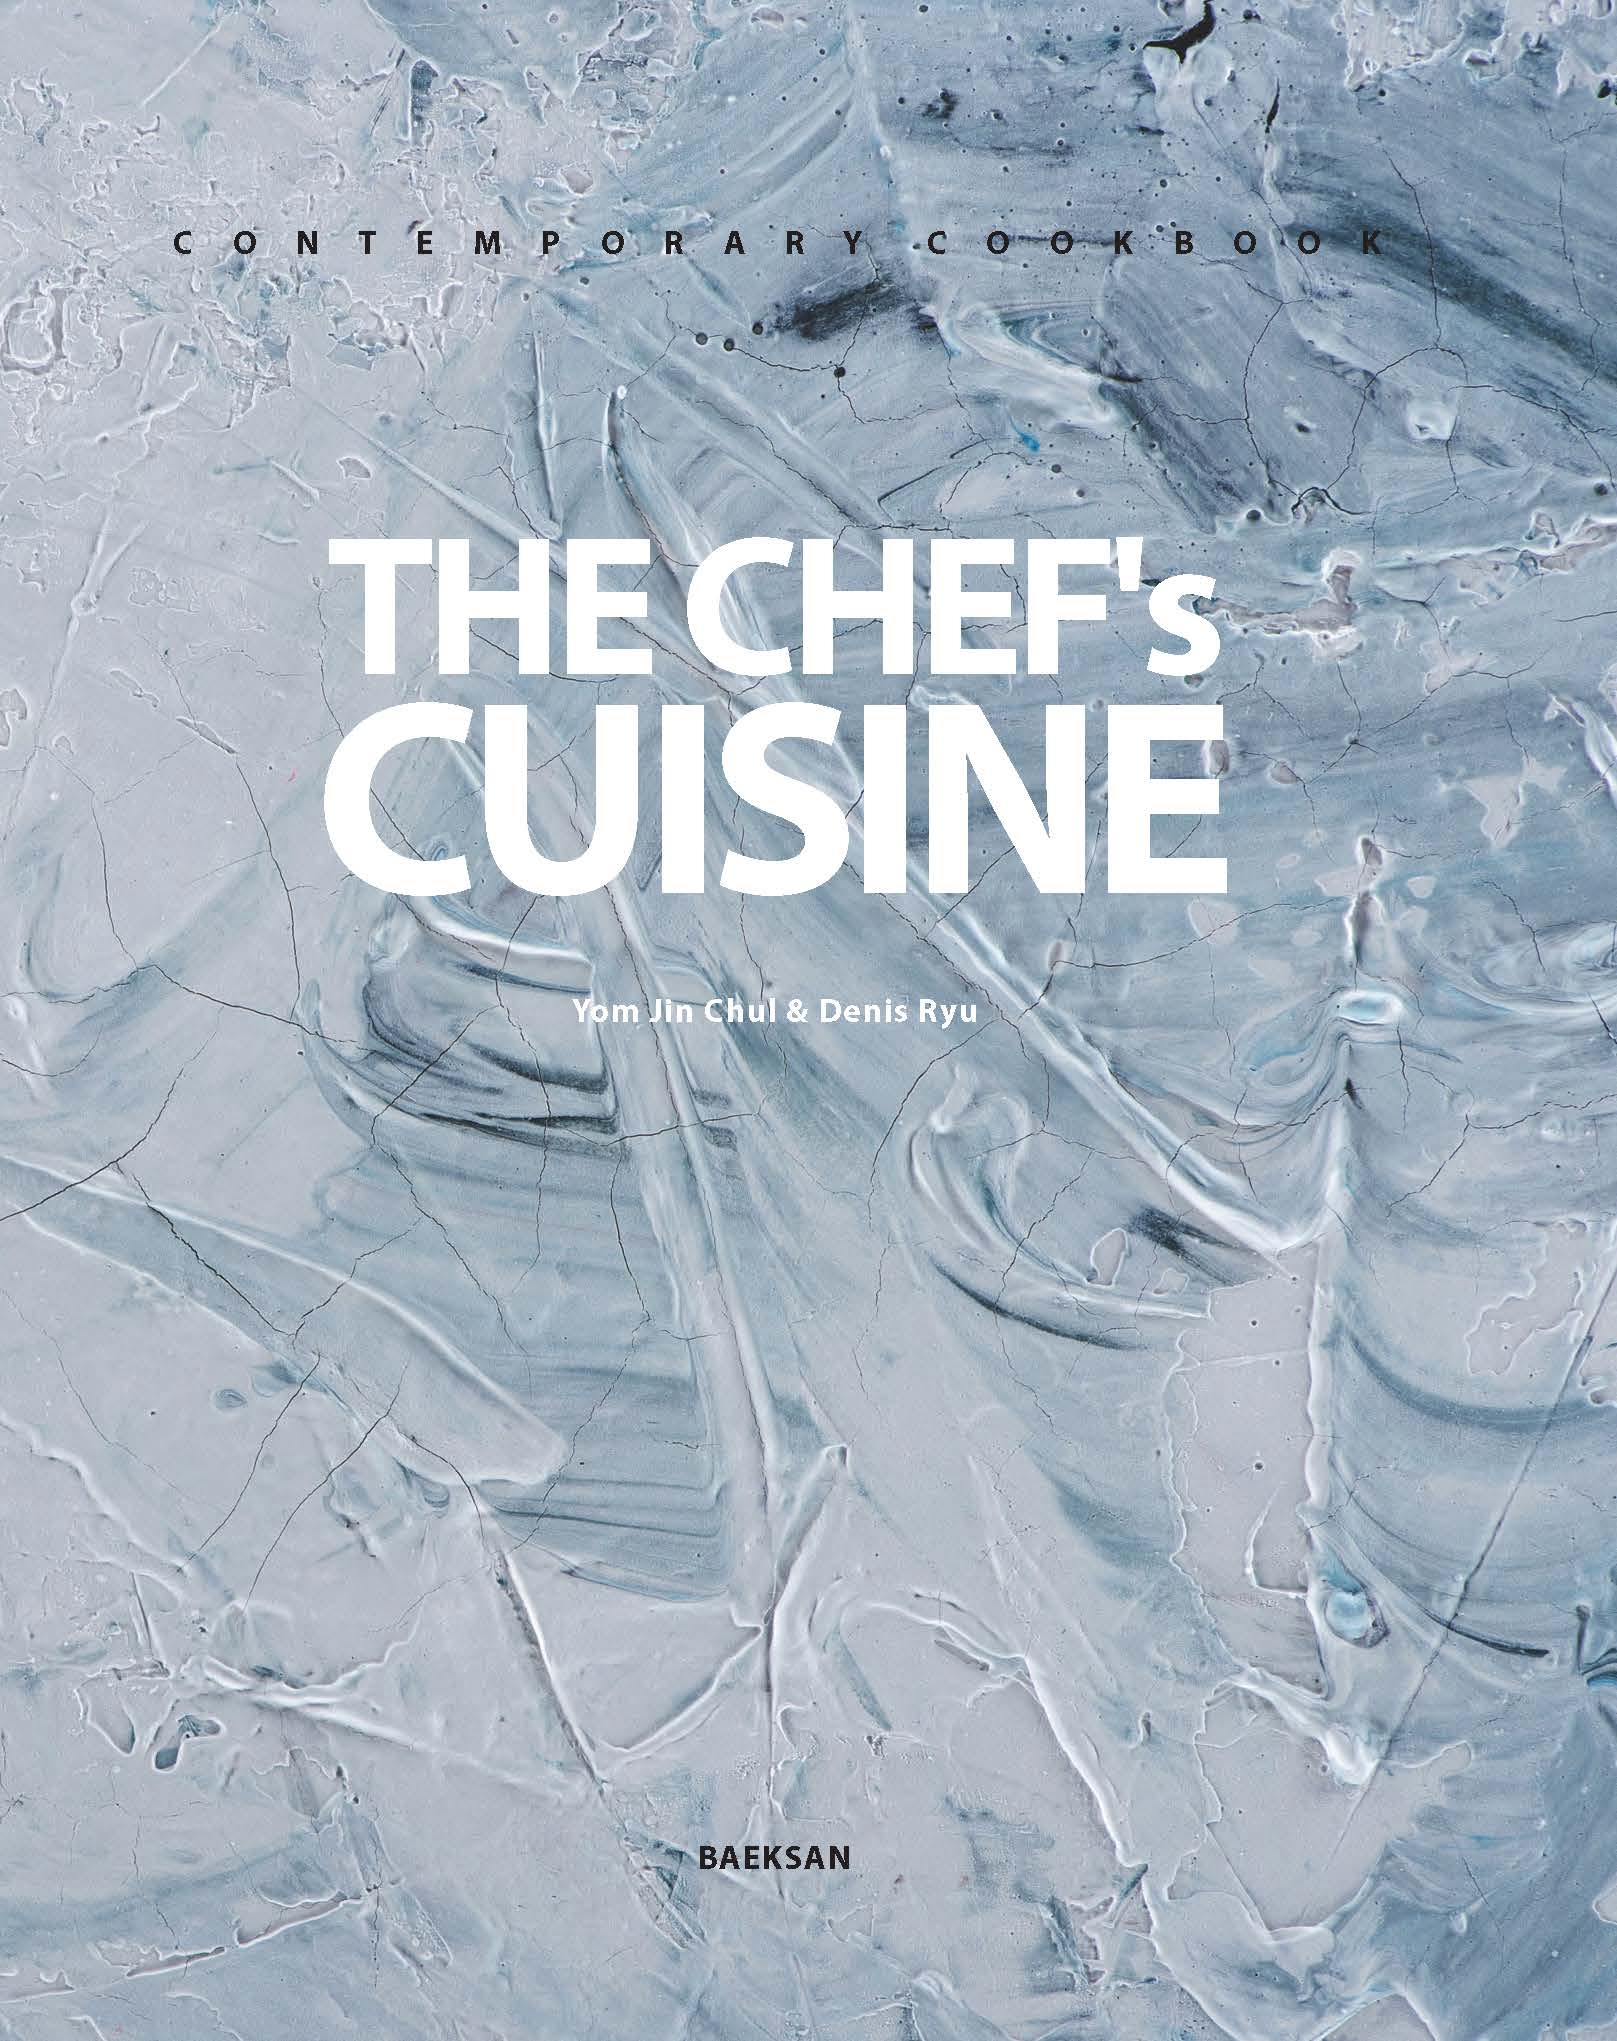 THE CHEF’S CUISINE